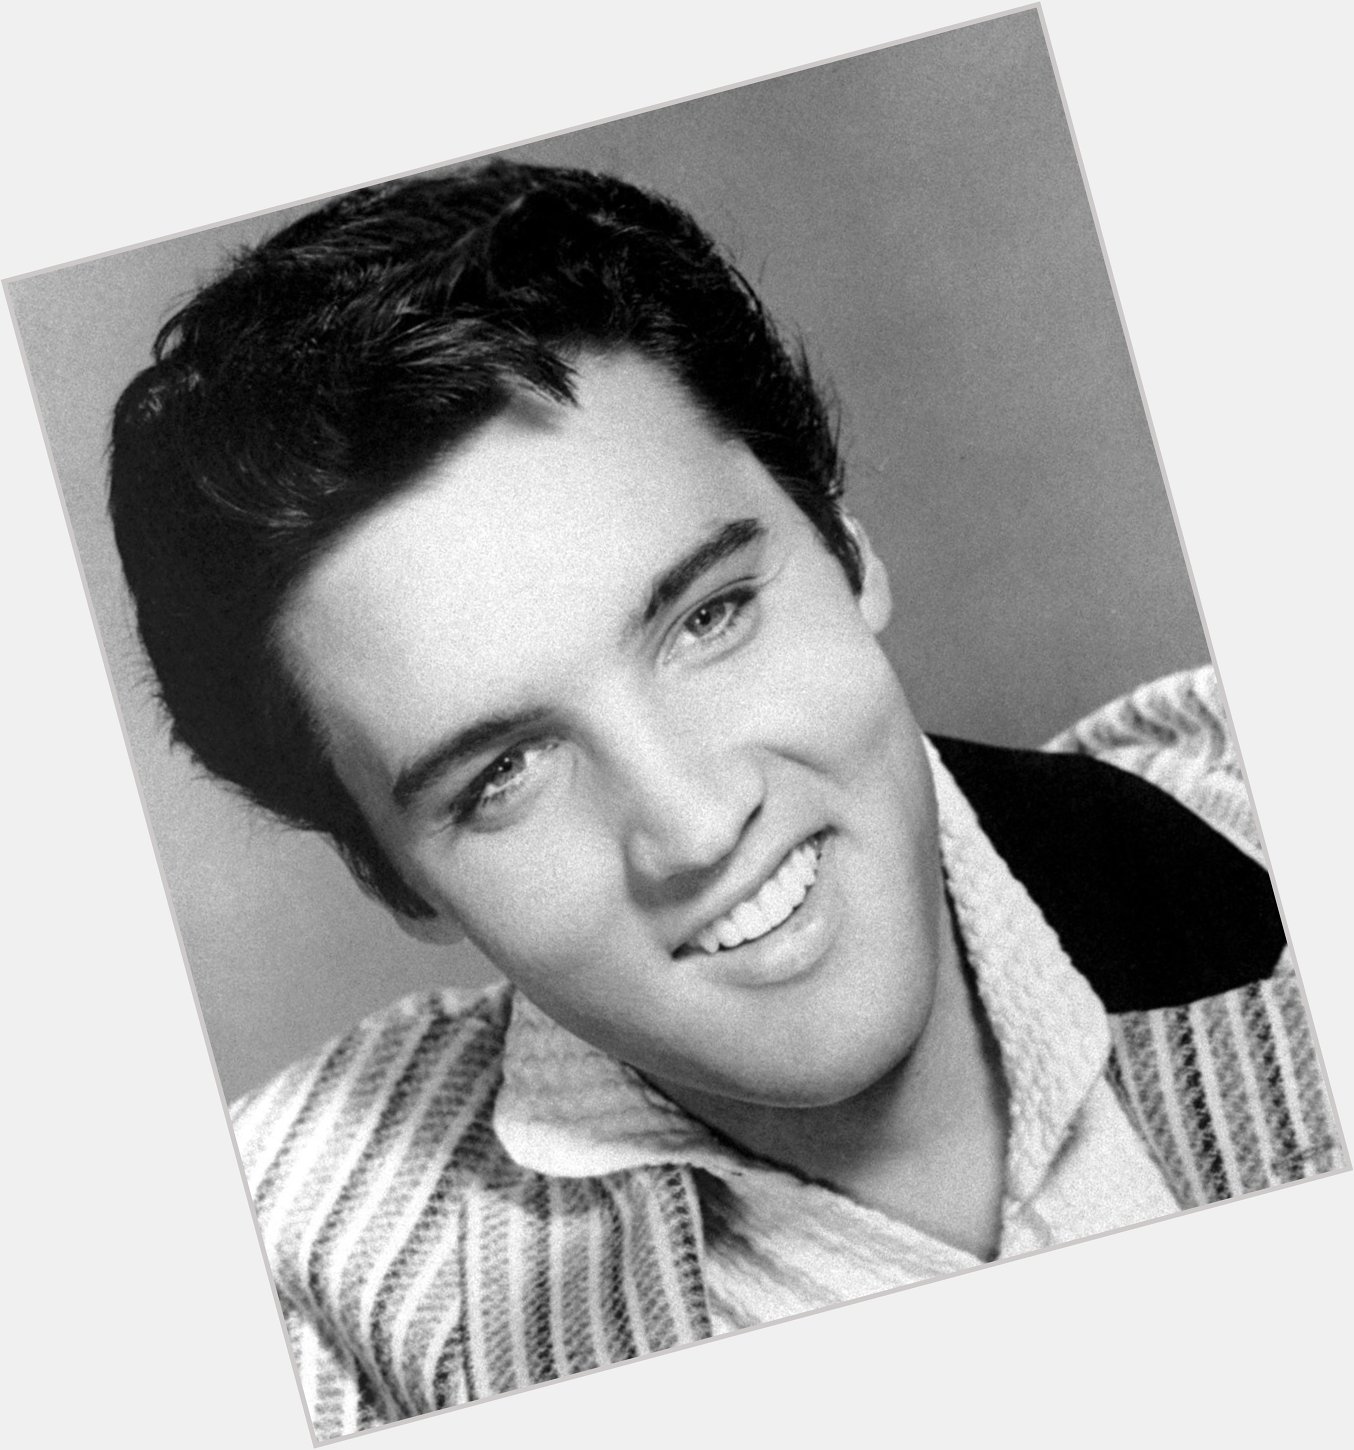 Happy Birthday to the King! Elvis Presley would be 80 today, so here are 8 ways to celebrate:  